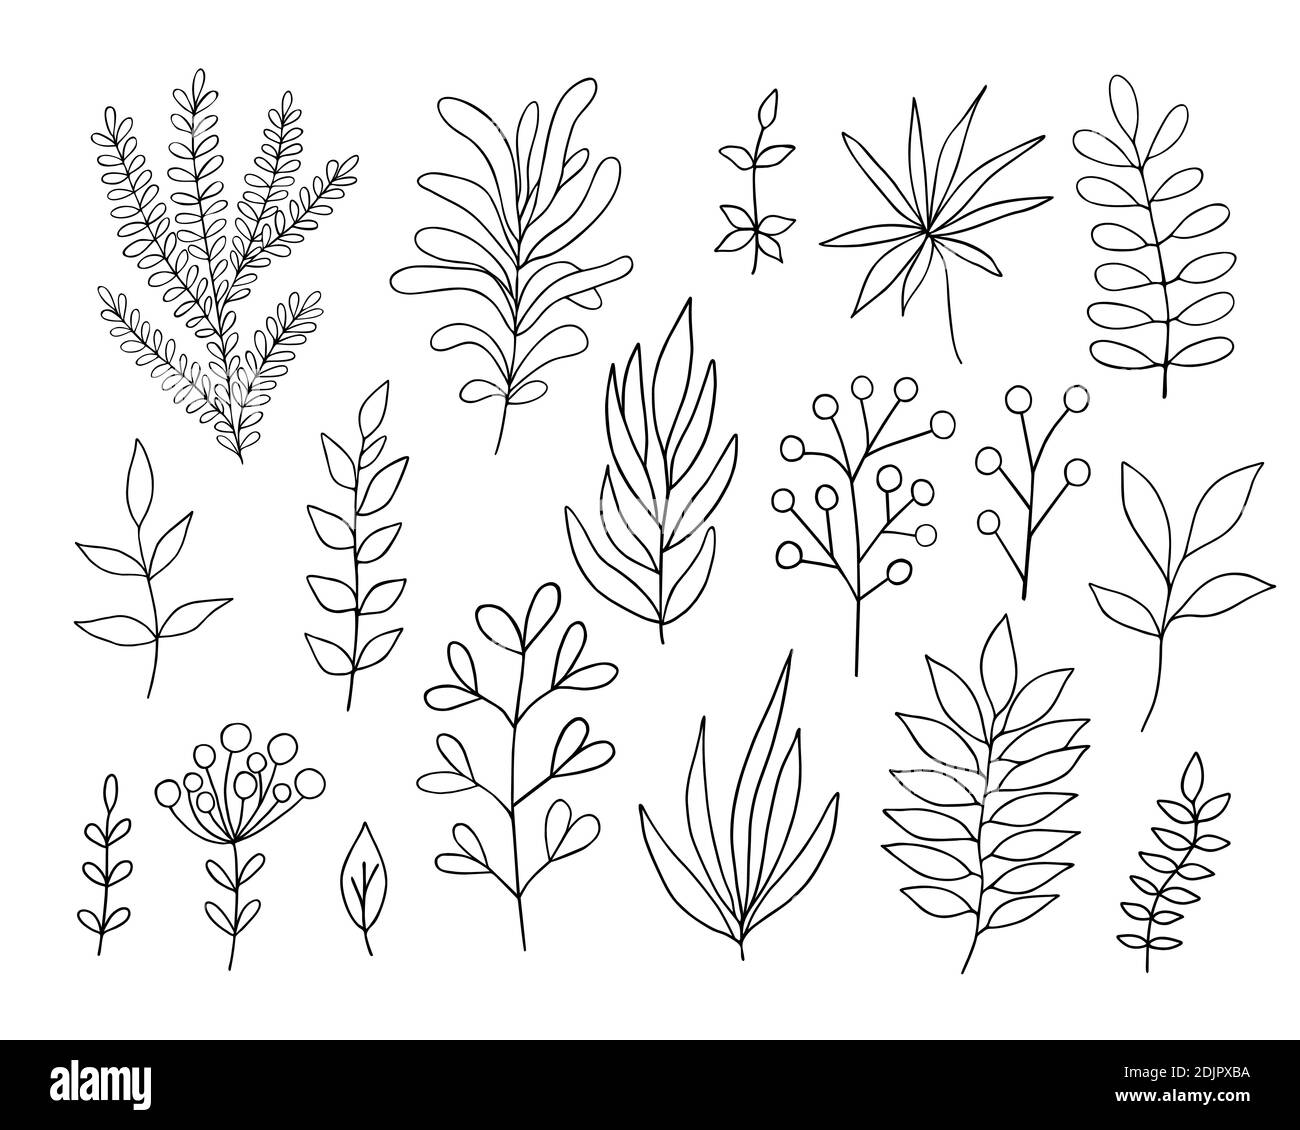 30 Easy Ways to Draw Plants & Leaves | Plant drawing, Leaf drawing, Flower  drawing